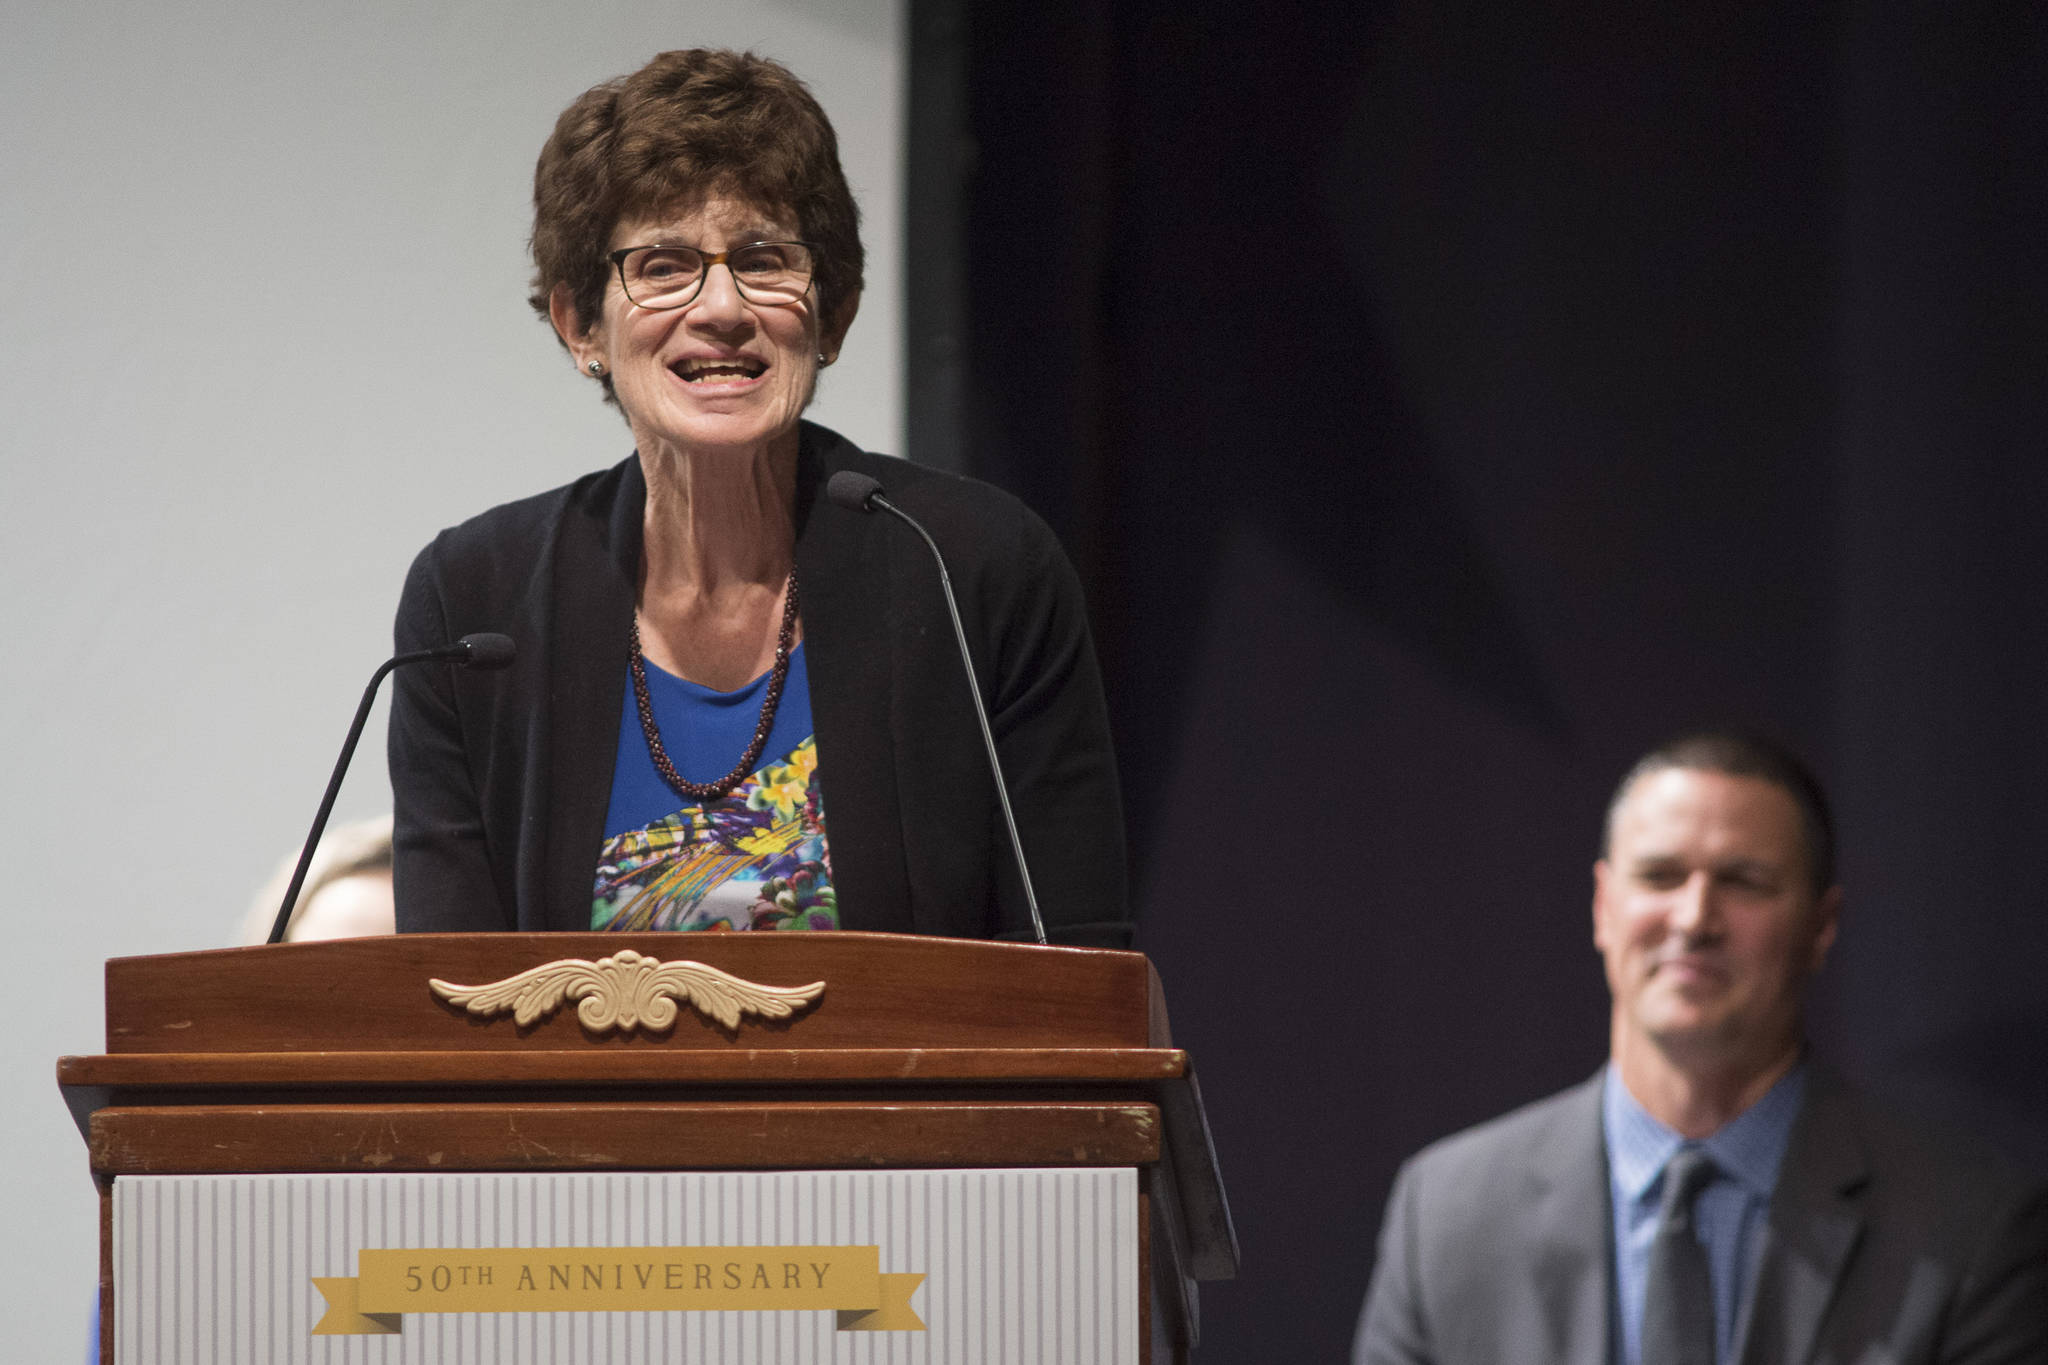 Maida Buckley, of Fairbanks, receives her Lifetime Achievement in the Humanities Award for Leadership at the 2019 Governor’s Arts and Humanities Awards at the Juneau Arts & Culture Center on Thursday, Feb. 7, 2019. (Michael Penn | Juneau Empire)